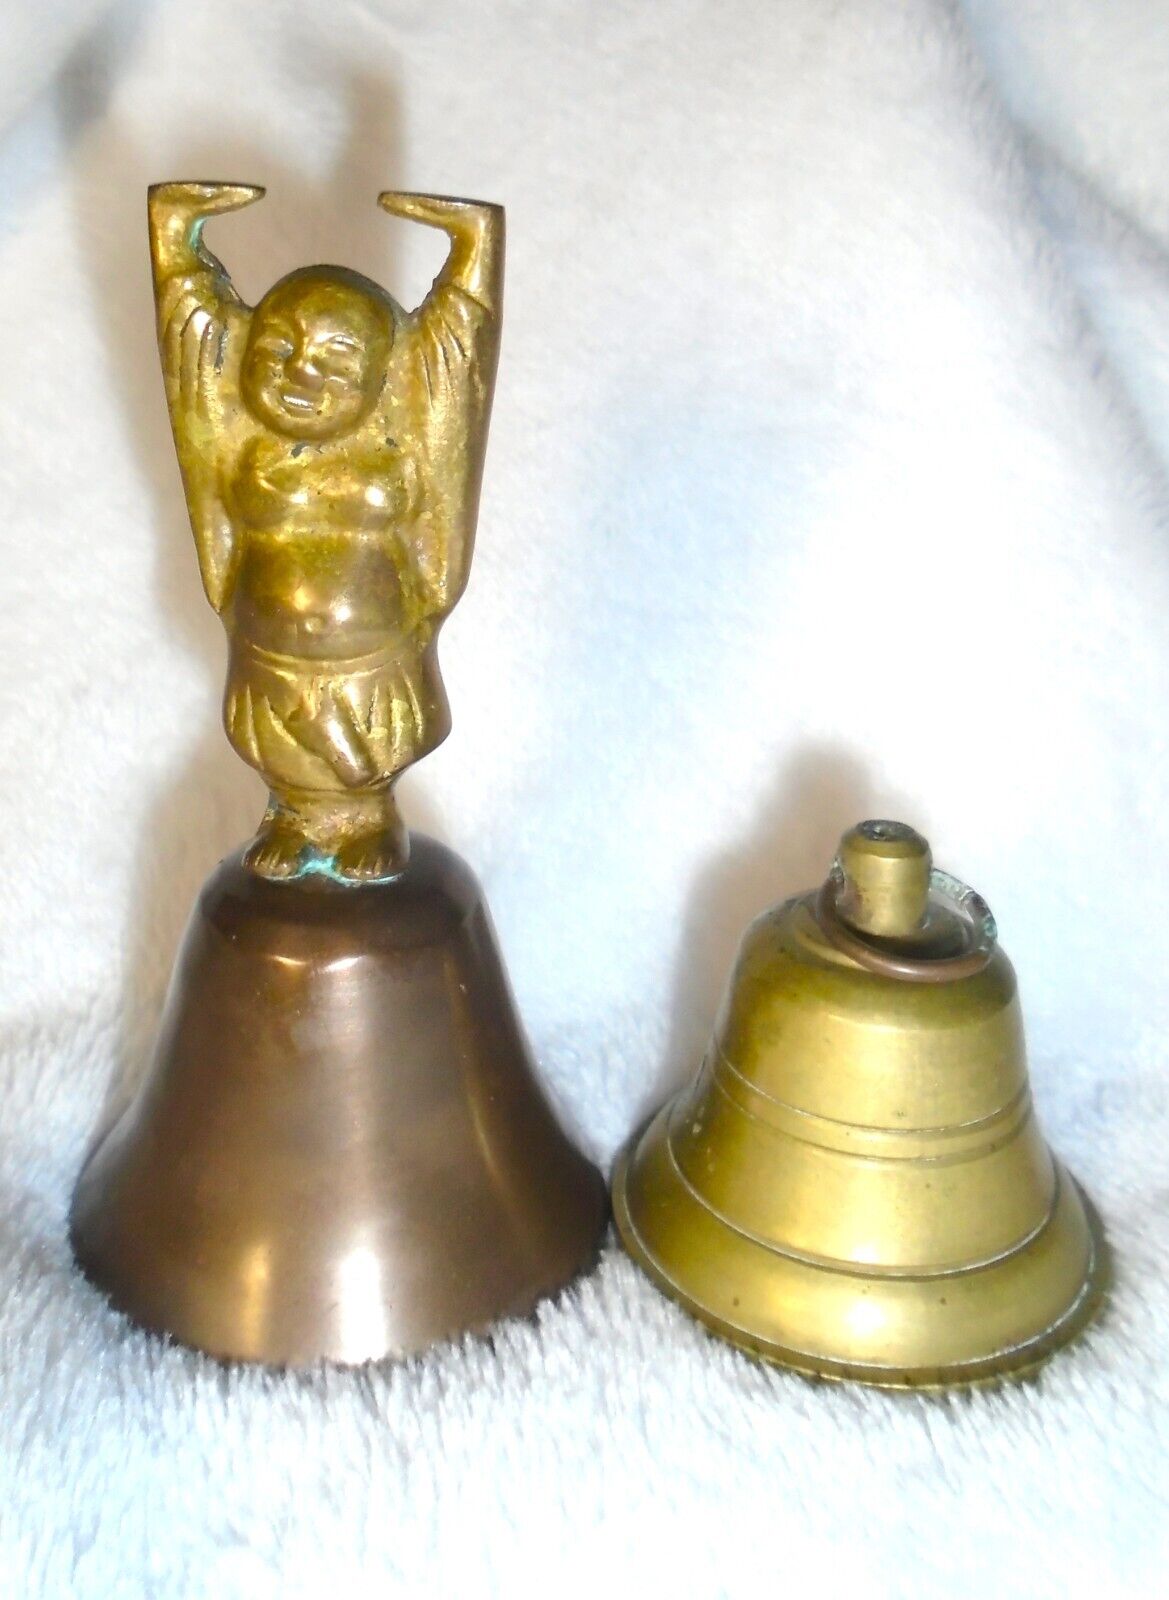 Solid Brass Buddha Bell  Ritual Buddhism & Hanging Bell 2 pc Lot Vintage Set